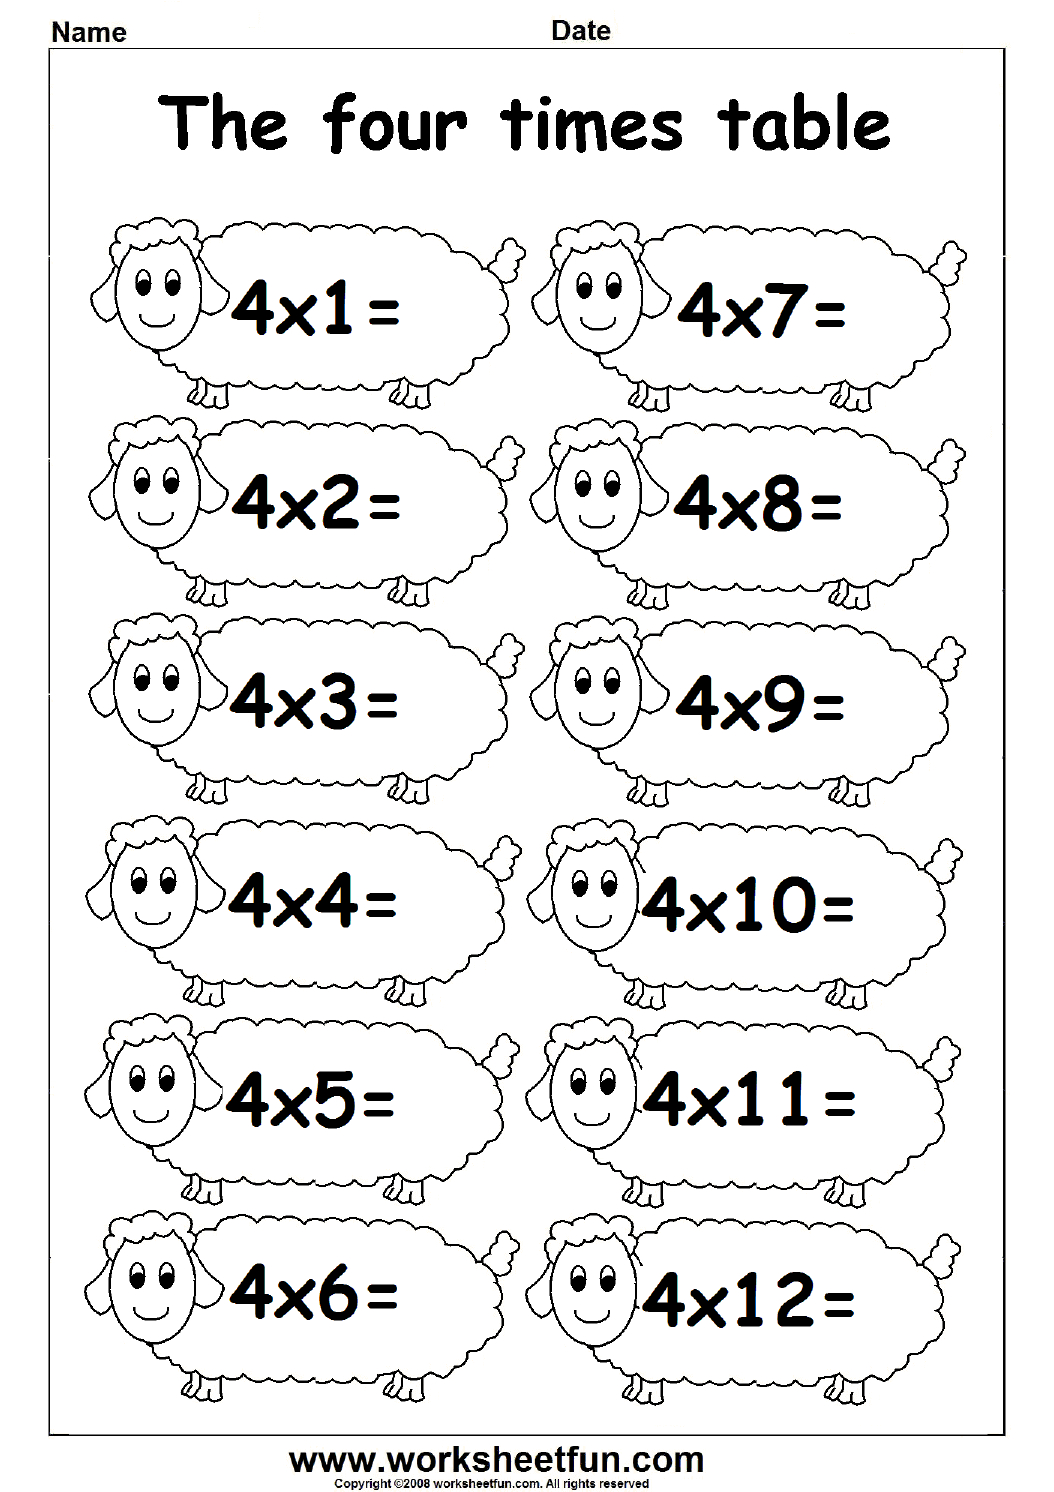 multiplication-facts-worksheets-multiplication-facts-to-144-no-free